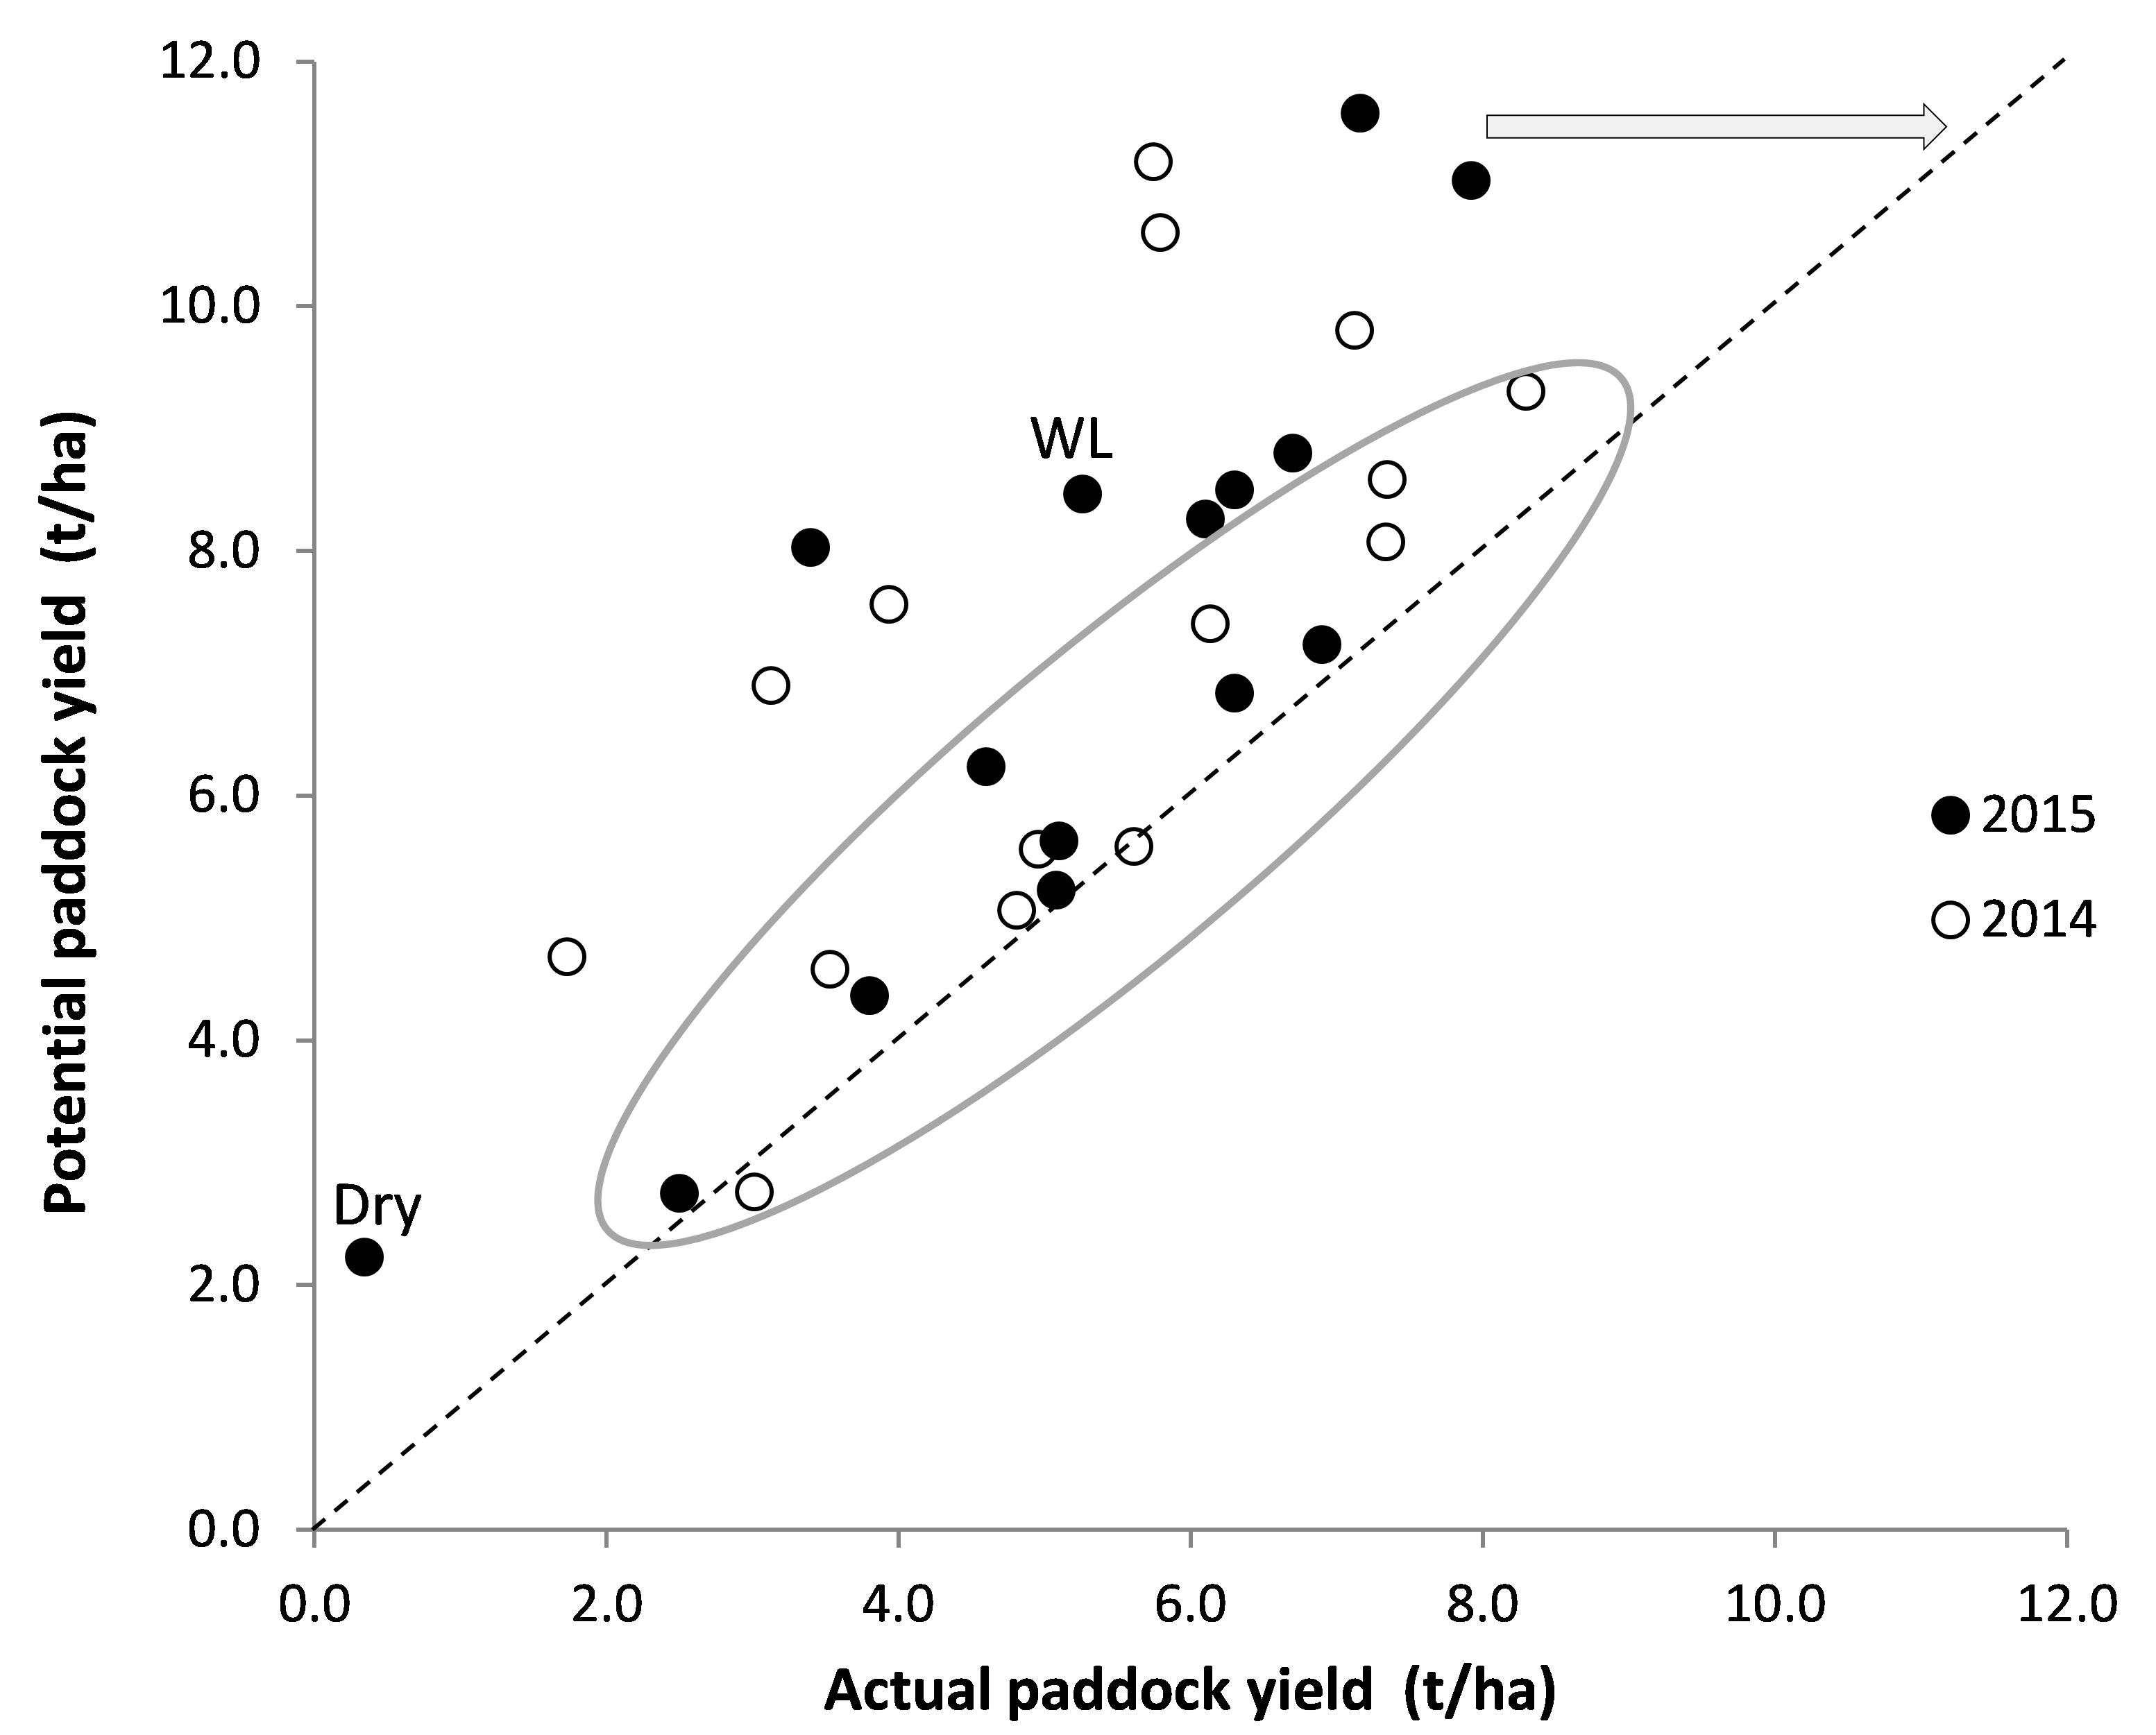 Scatter chart showing potential yield against the actual yield of wheat